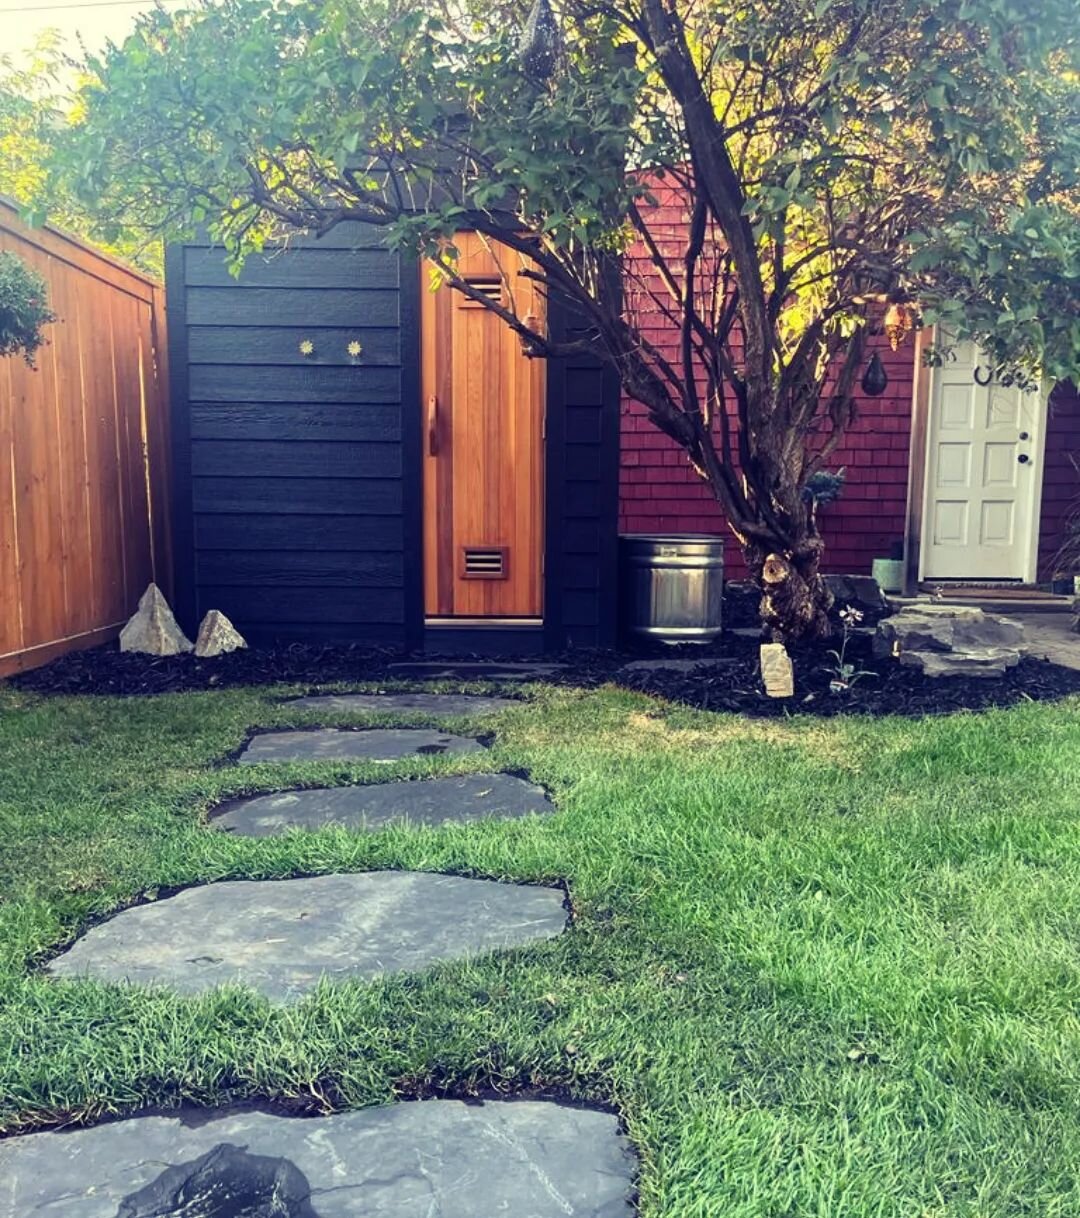 A Natural stone pathway is a beautiful feature to transition from one space to another.  This lucky client gets to walk to his outdoor sauna!

#calgarydreamscapes #yyc #yyclandscaping #calgarylandscaping #pathway #calgary #landscaping #sauna #yyclivi